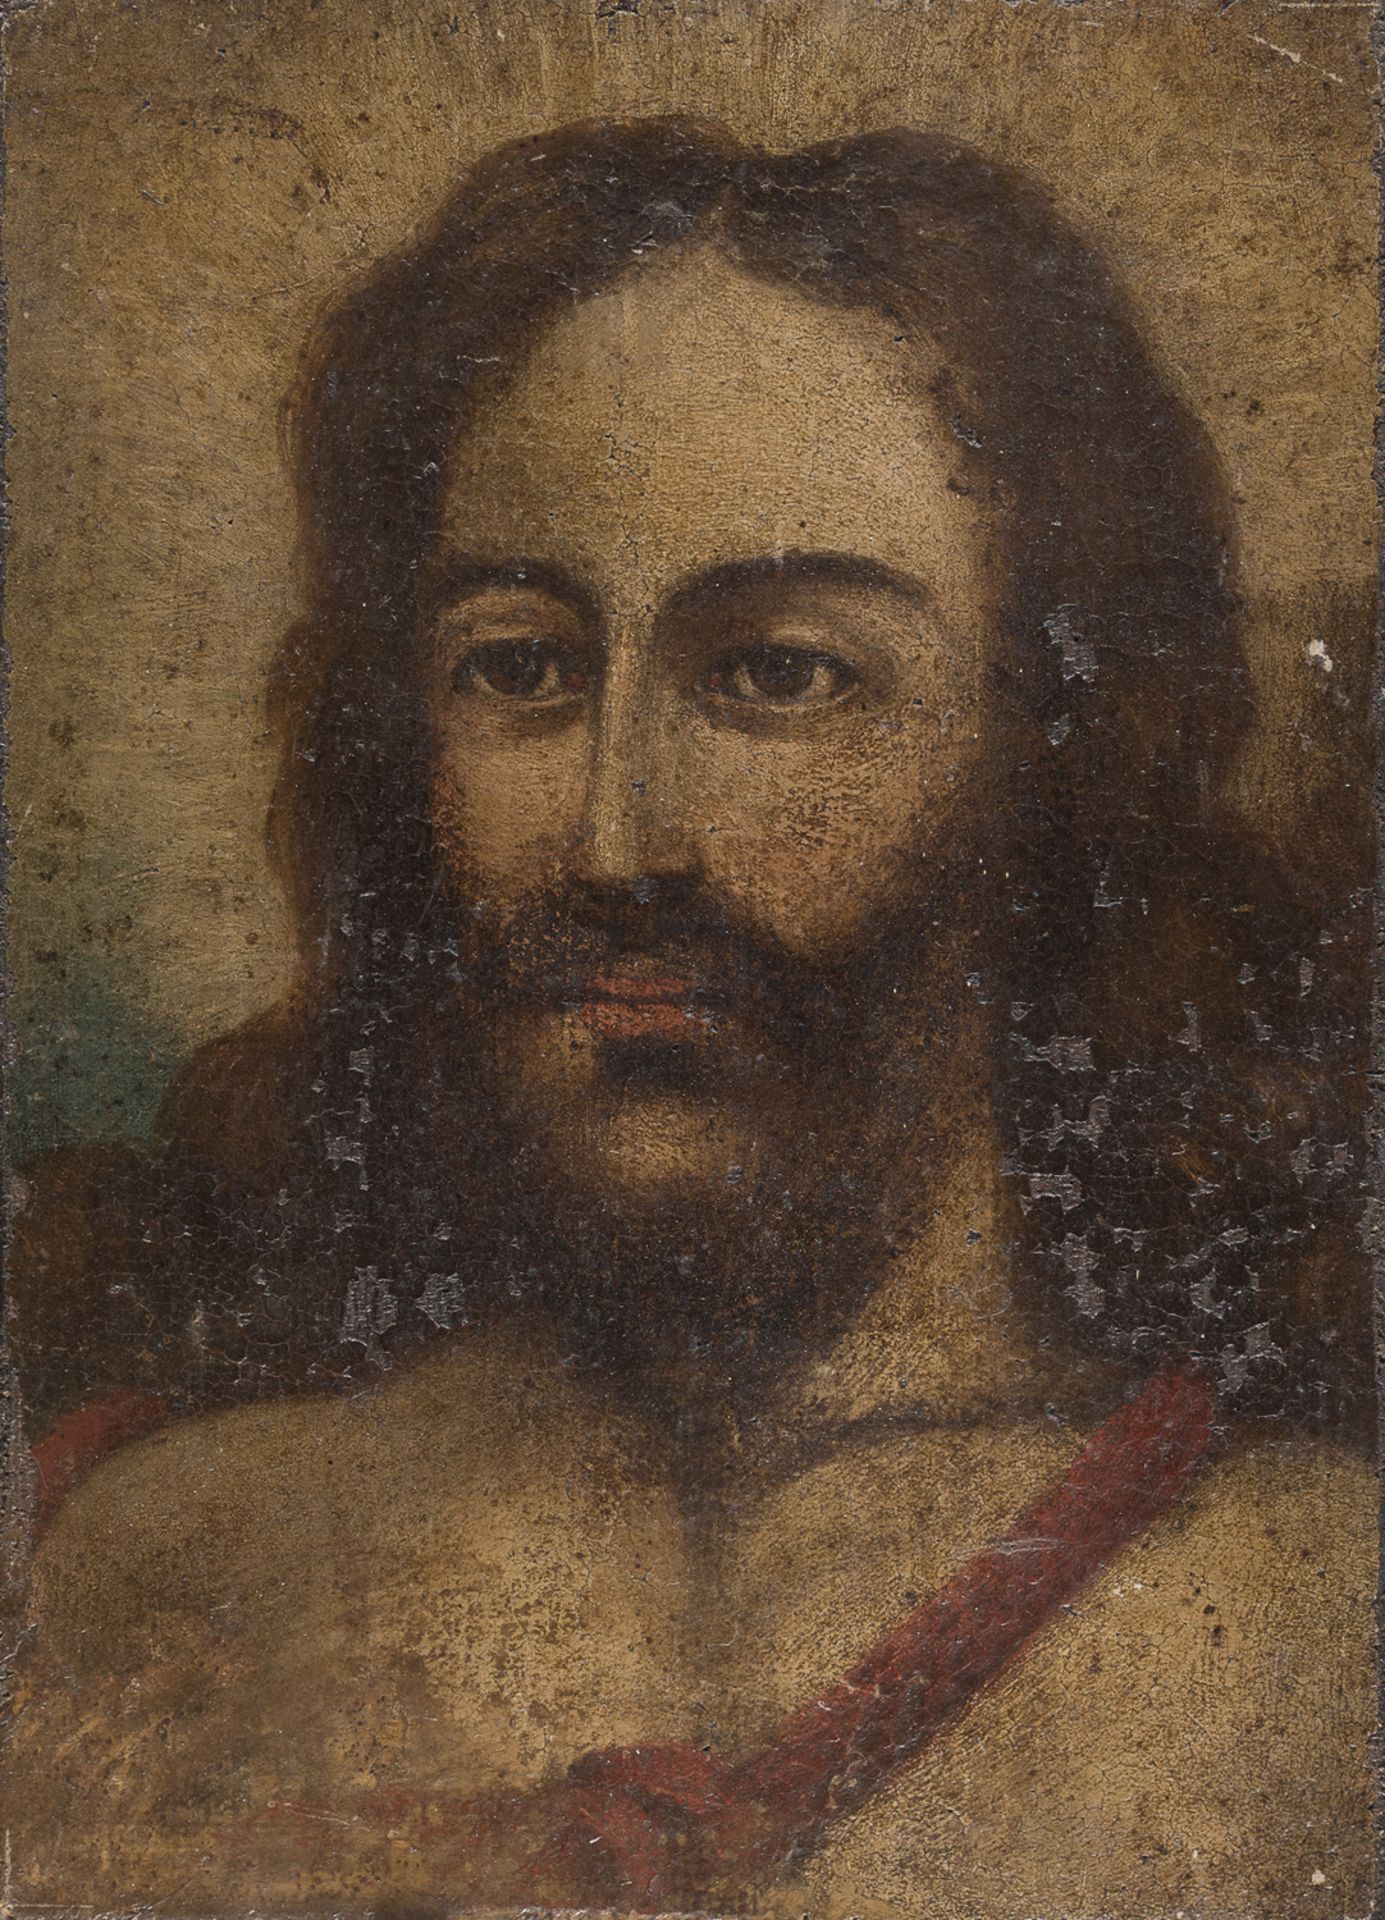 OIL PAINTING OF ST JOHN THE BAPTIST BY A SPANISH PAINTER OF THE 17TH CENTURY